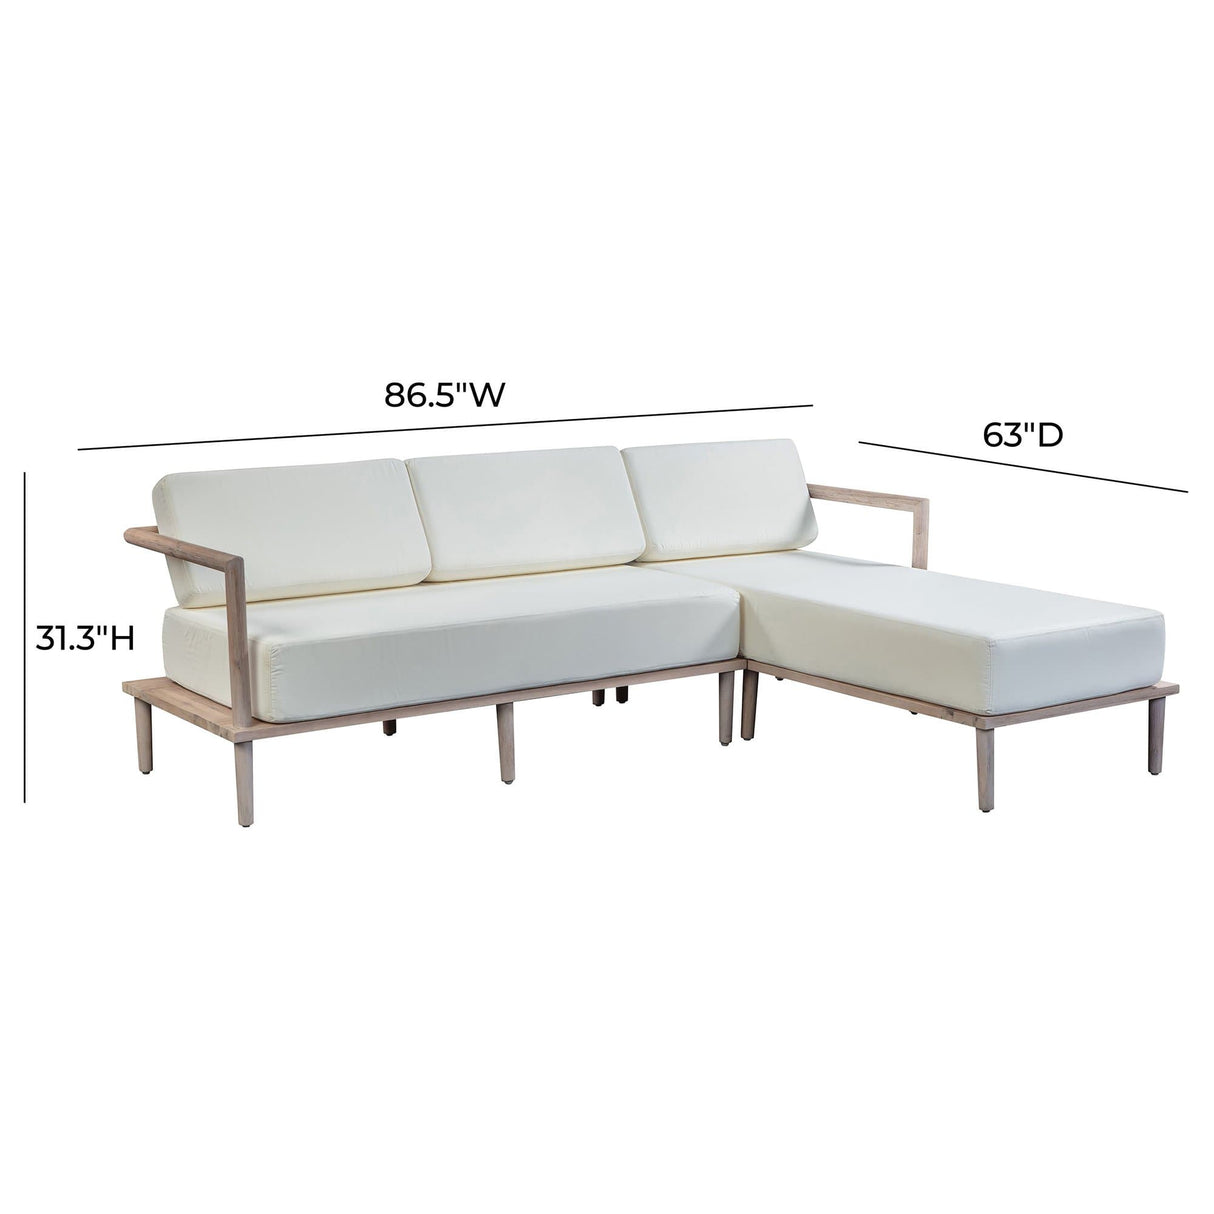 Candelabra Home Emerson Cream Outdoor Sectional Furniture